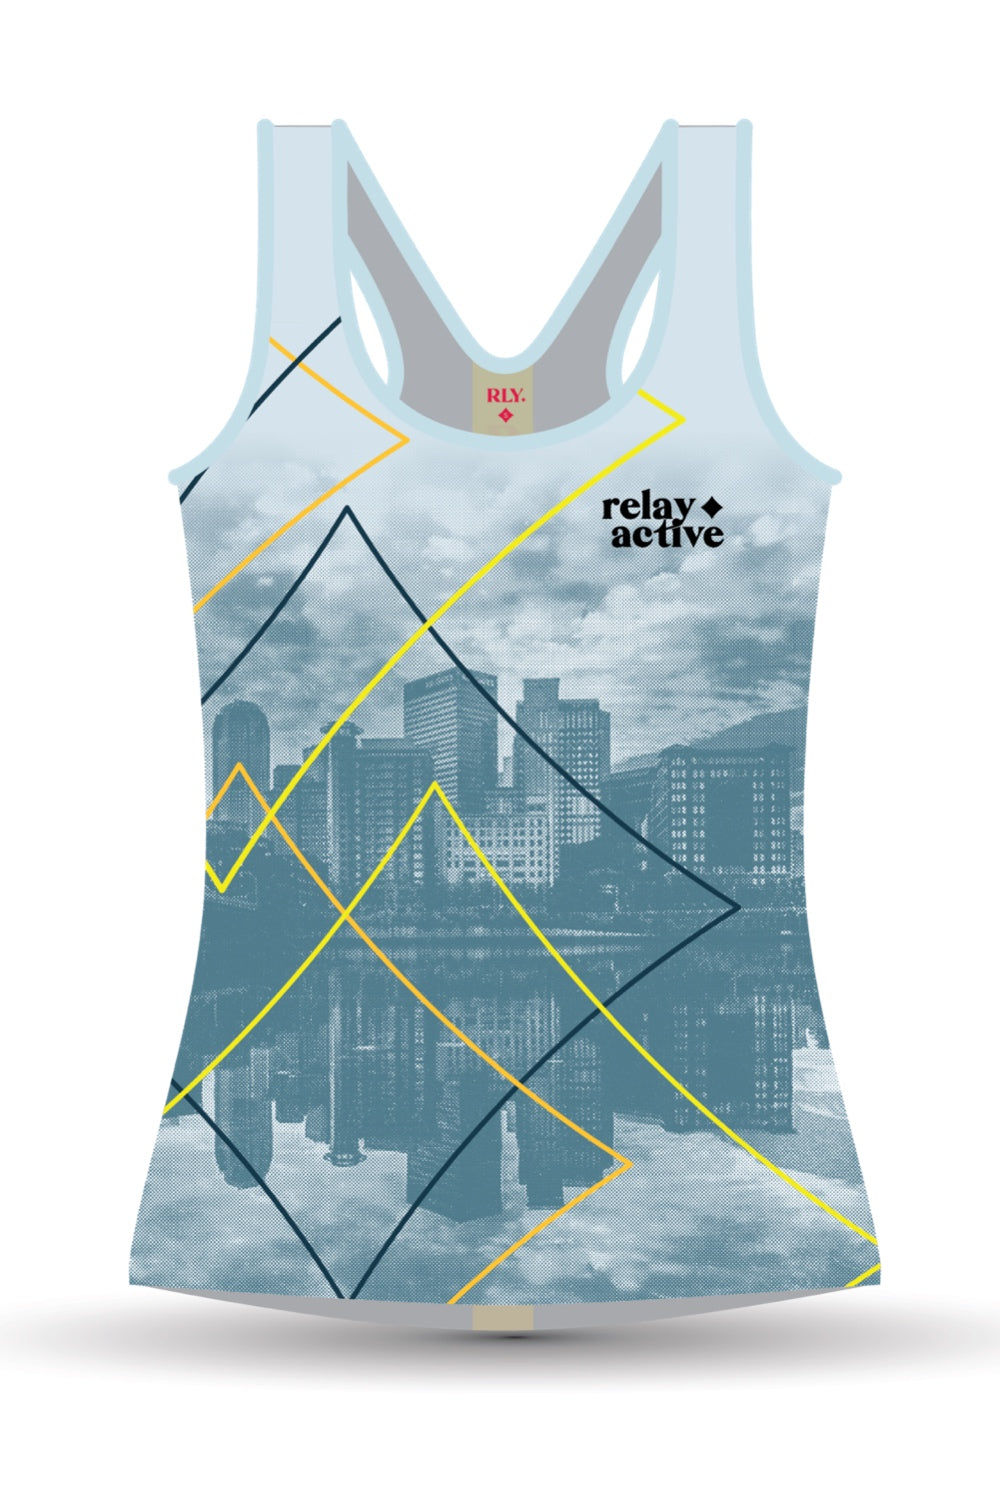 Pittsburgh Black and Gold Edition Singlet